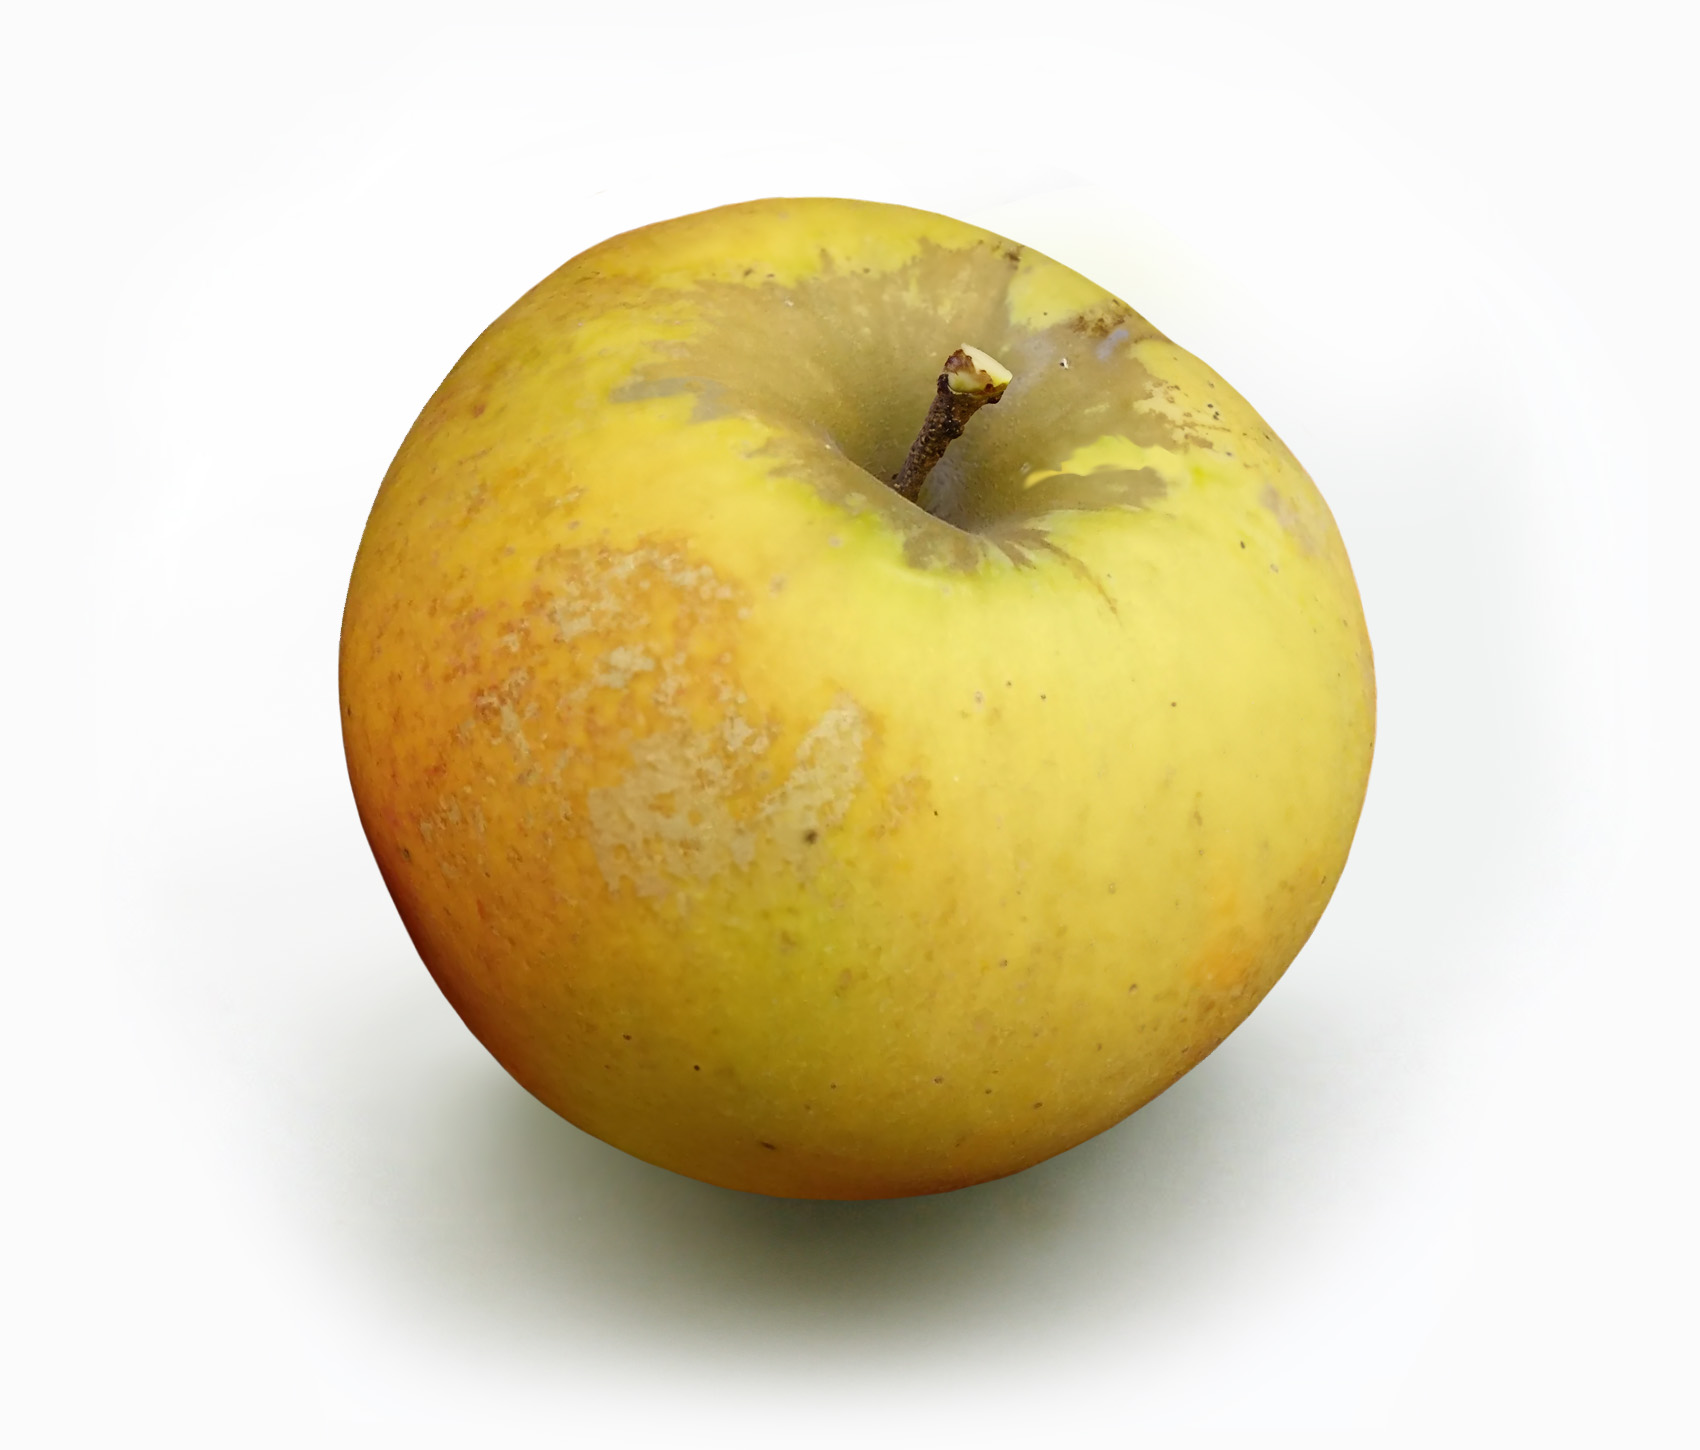 yellow apples and their uses -Silken apples 1.0